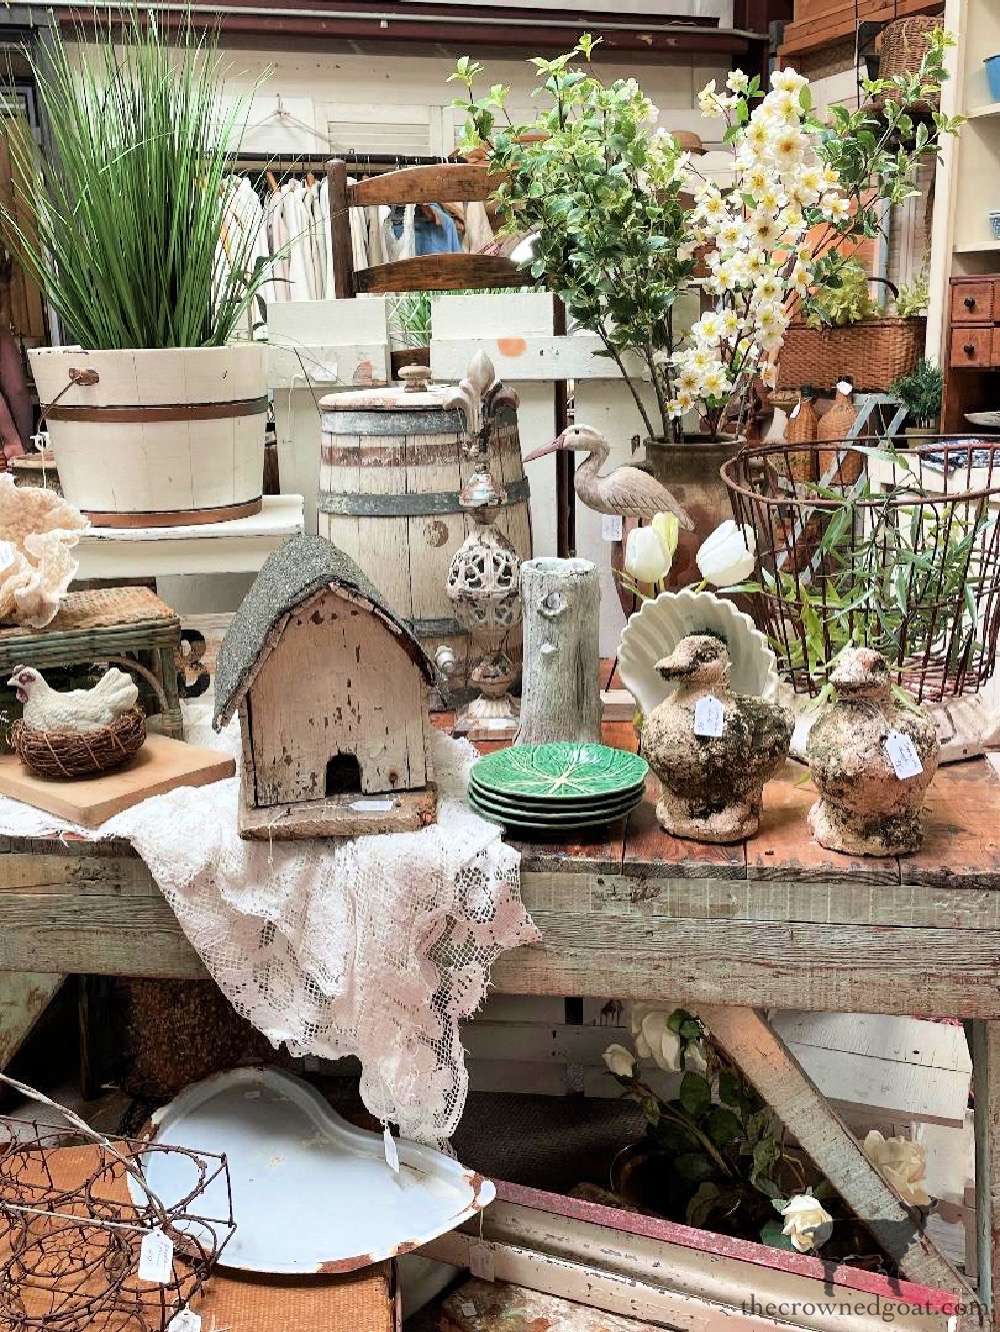 Tips for Shopping Yard Sales and Our Latest Finds